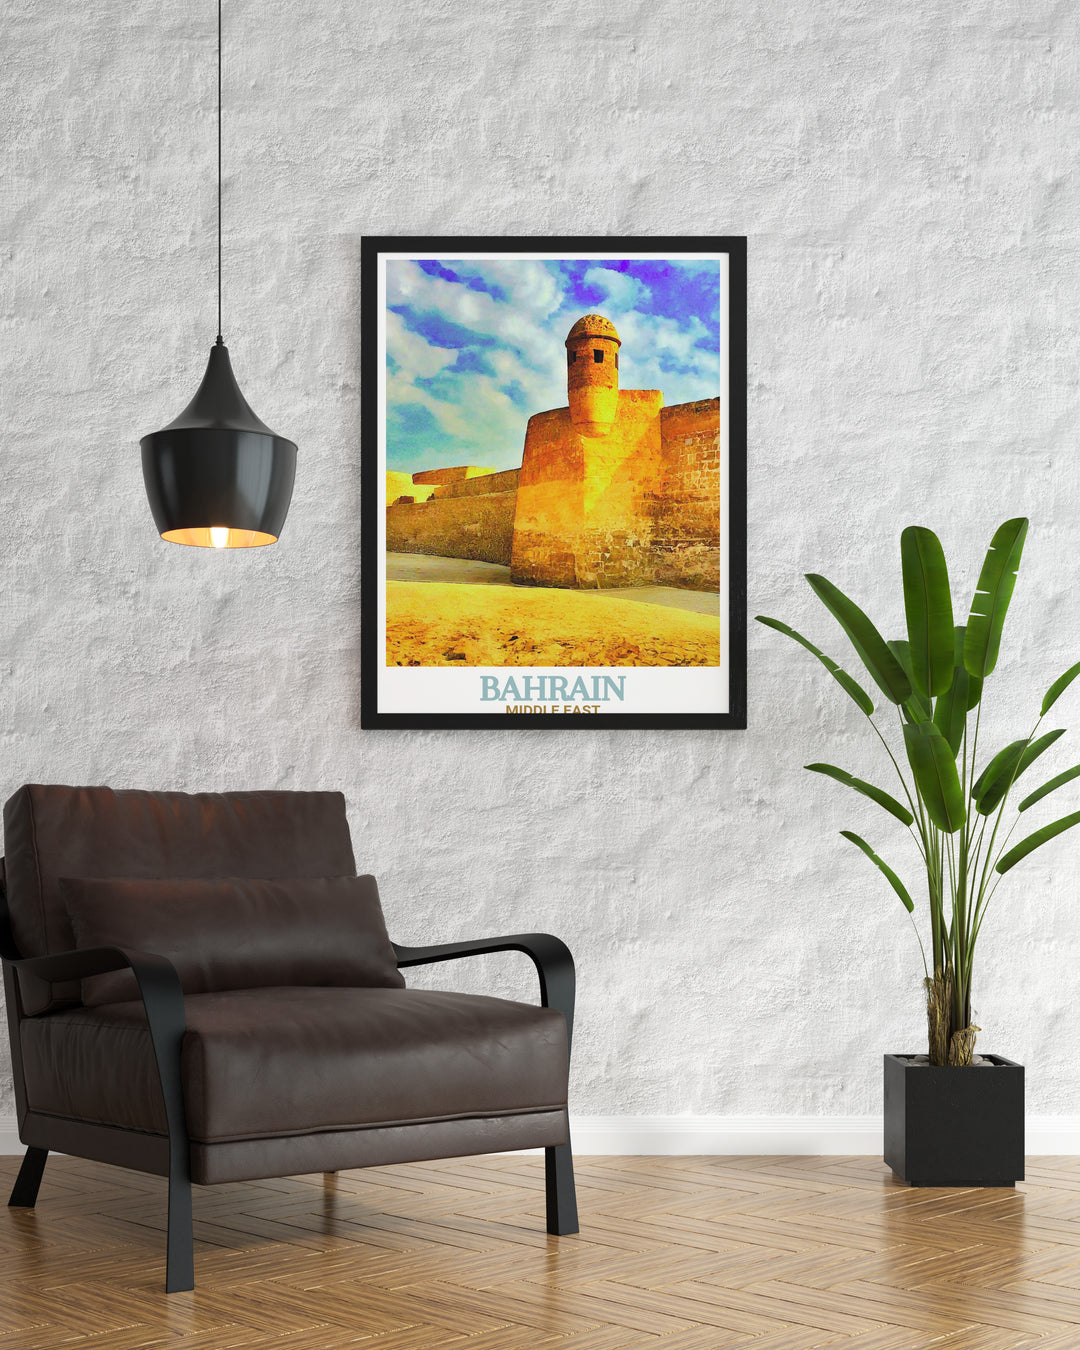 Bahrain Travel Art featuring the iconic Bahrain Fort a perfect addition to any home decor celebrating the intricate architecture and vibrant culture of Bahrain.